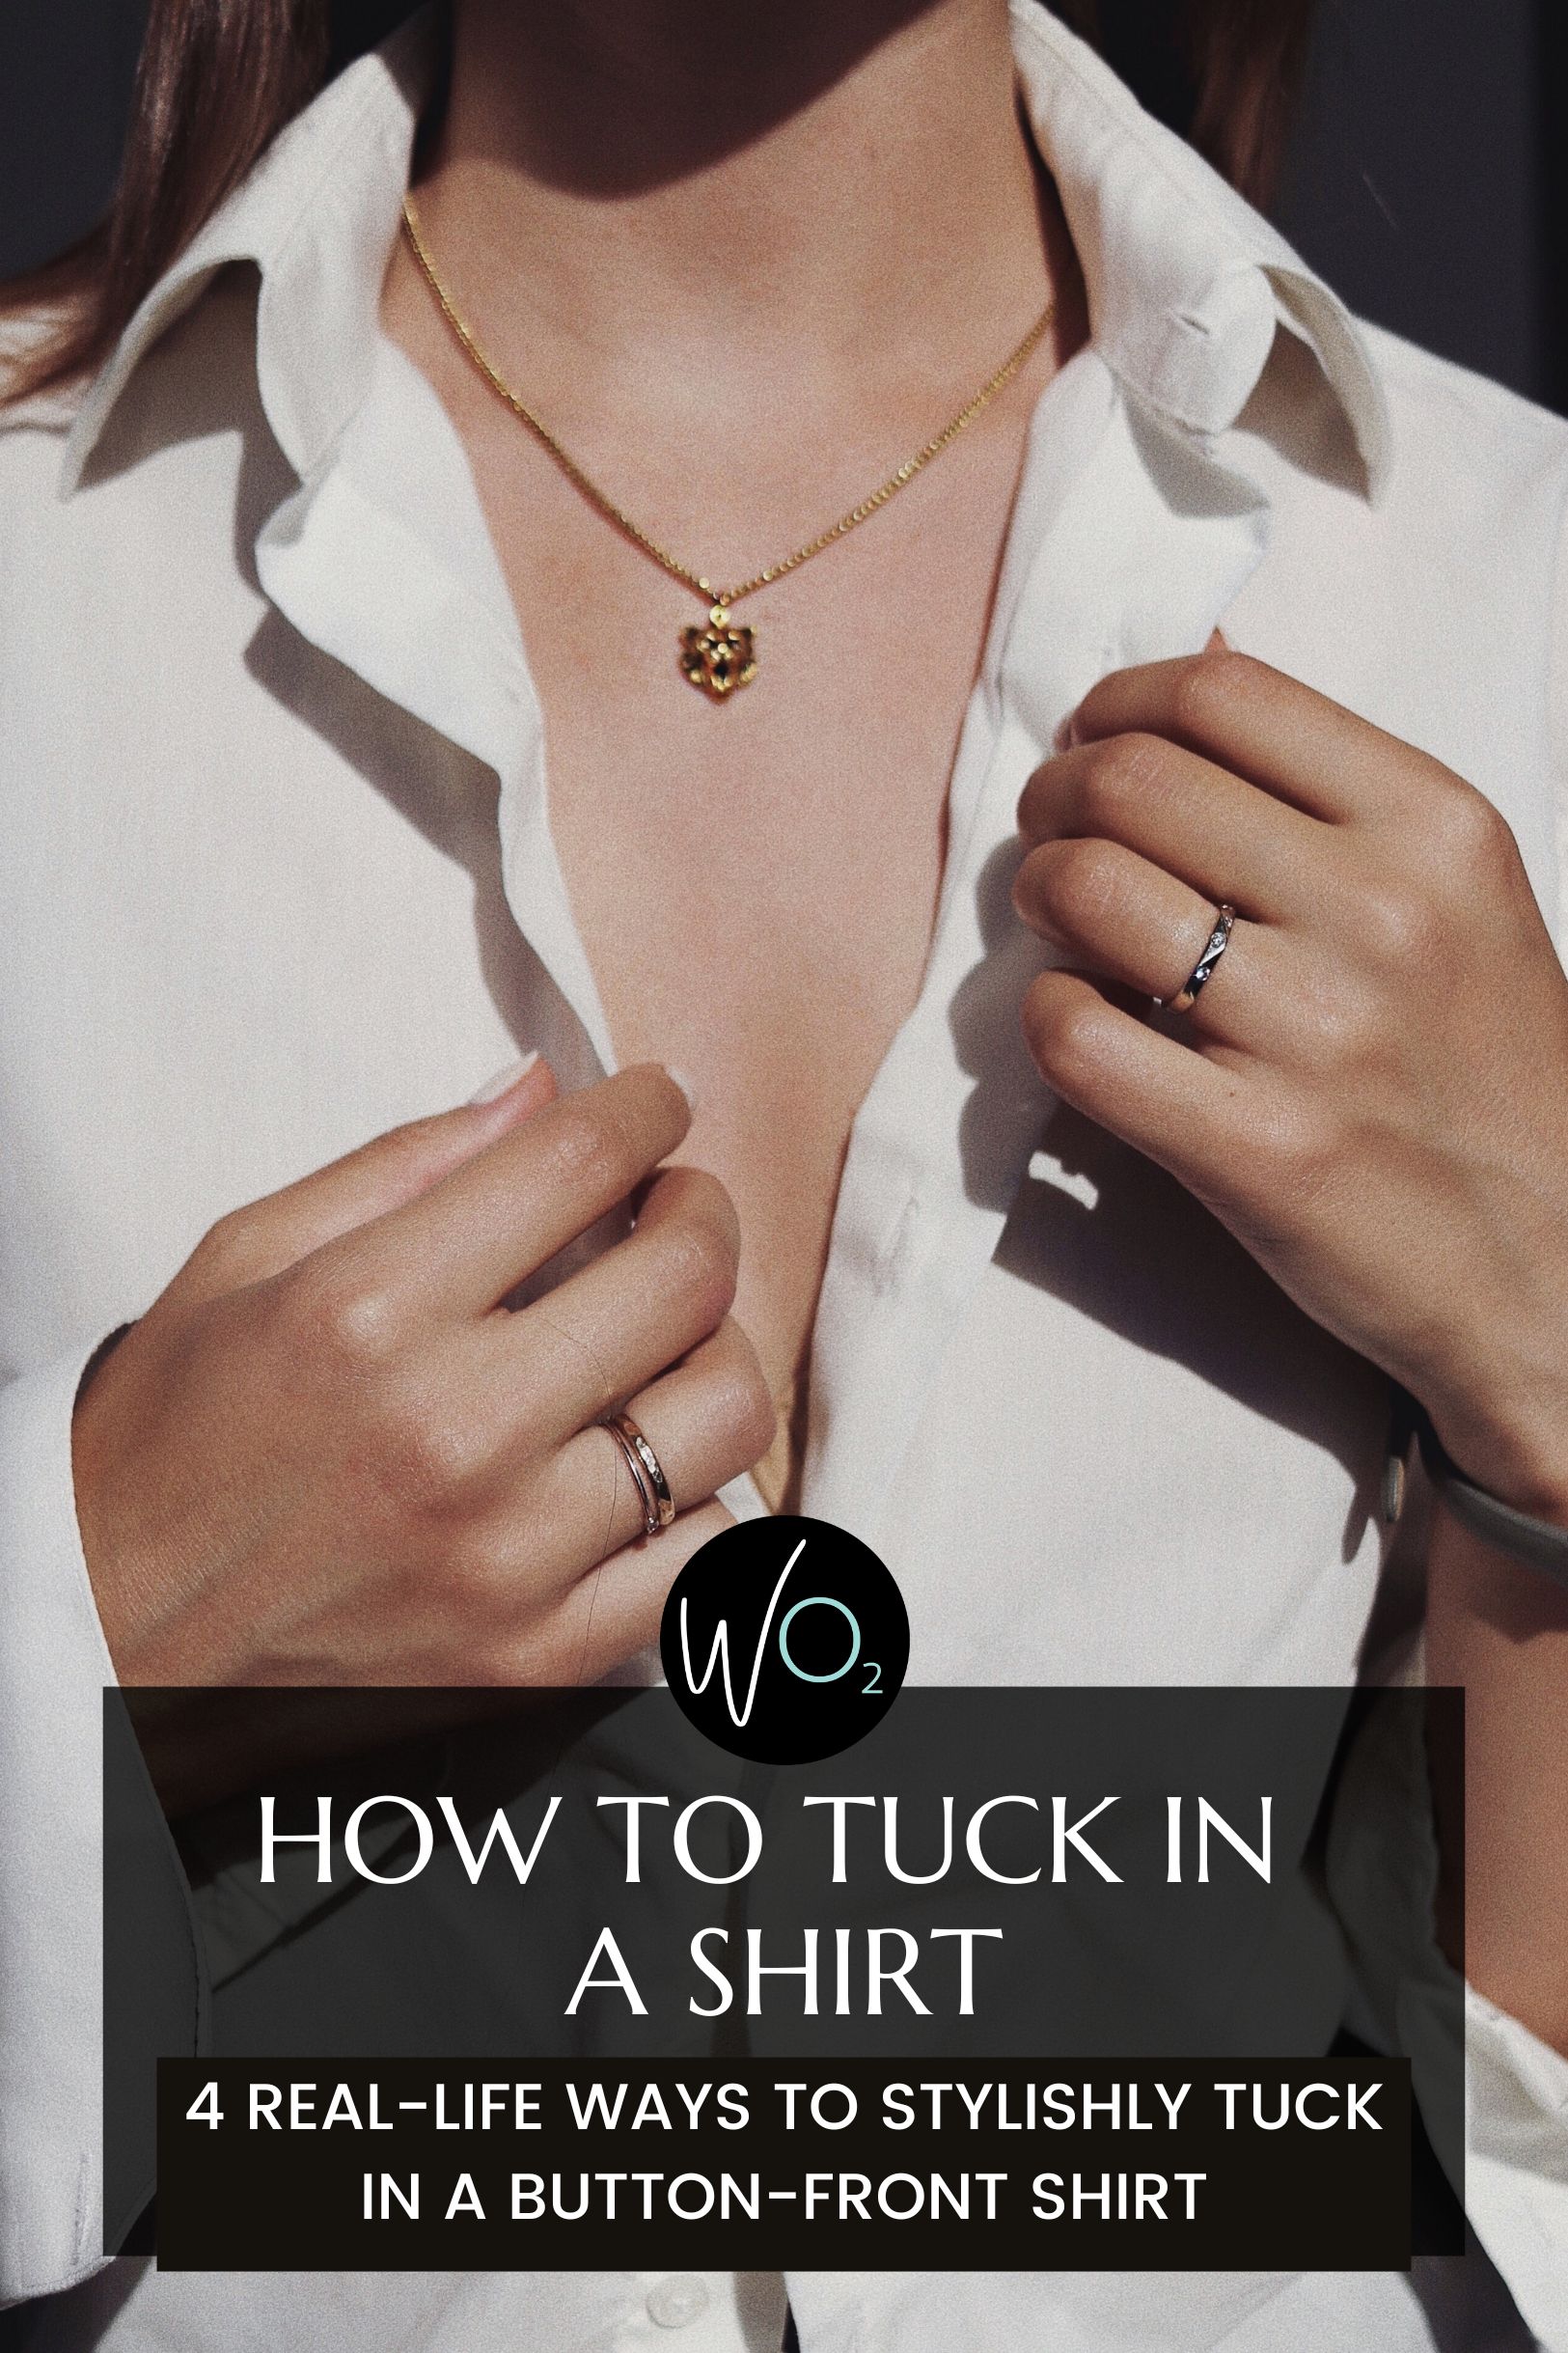 How to Tuck in Your Shirt